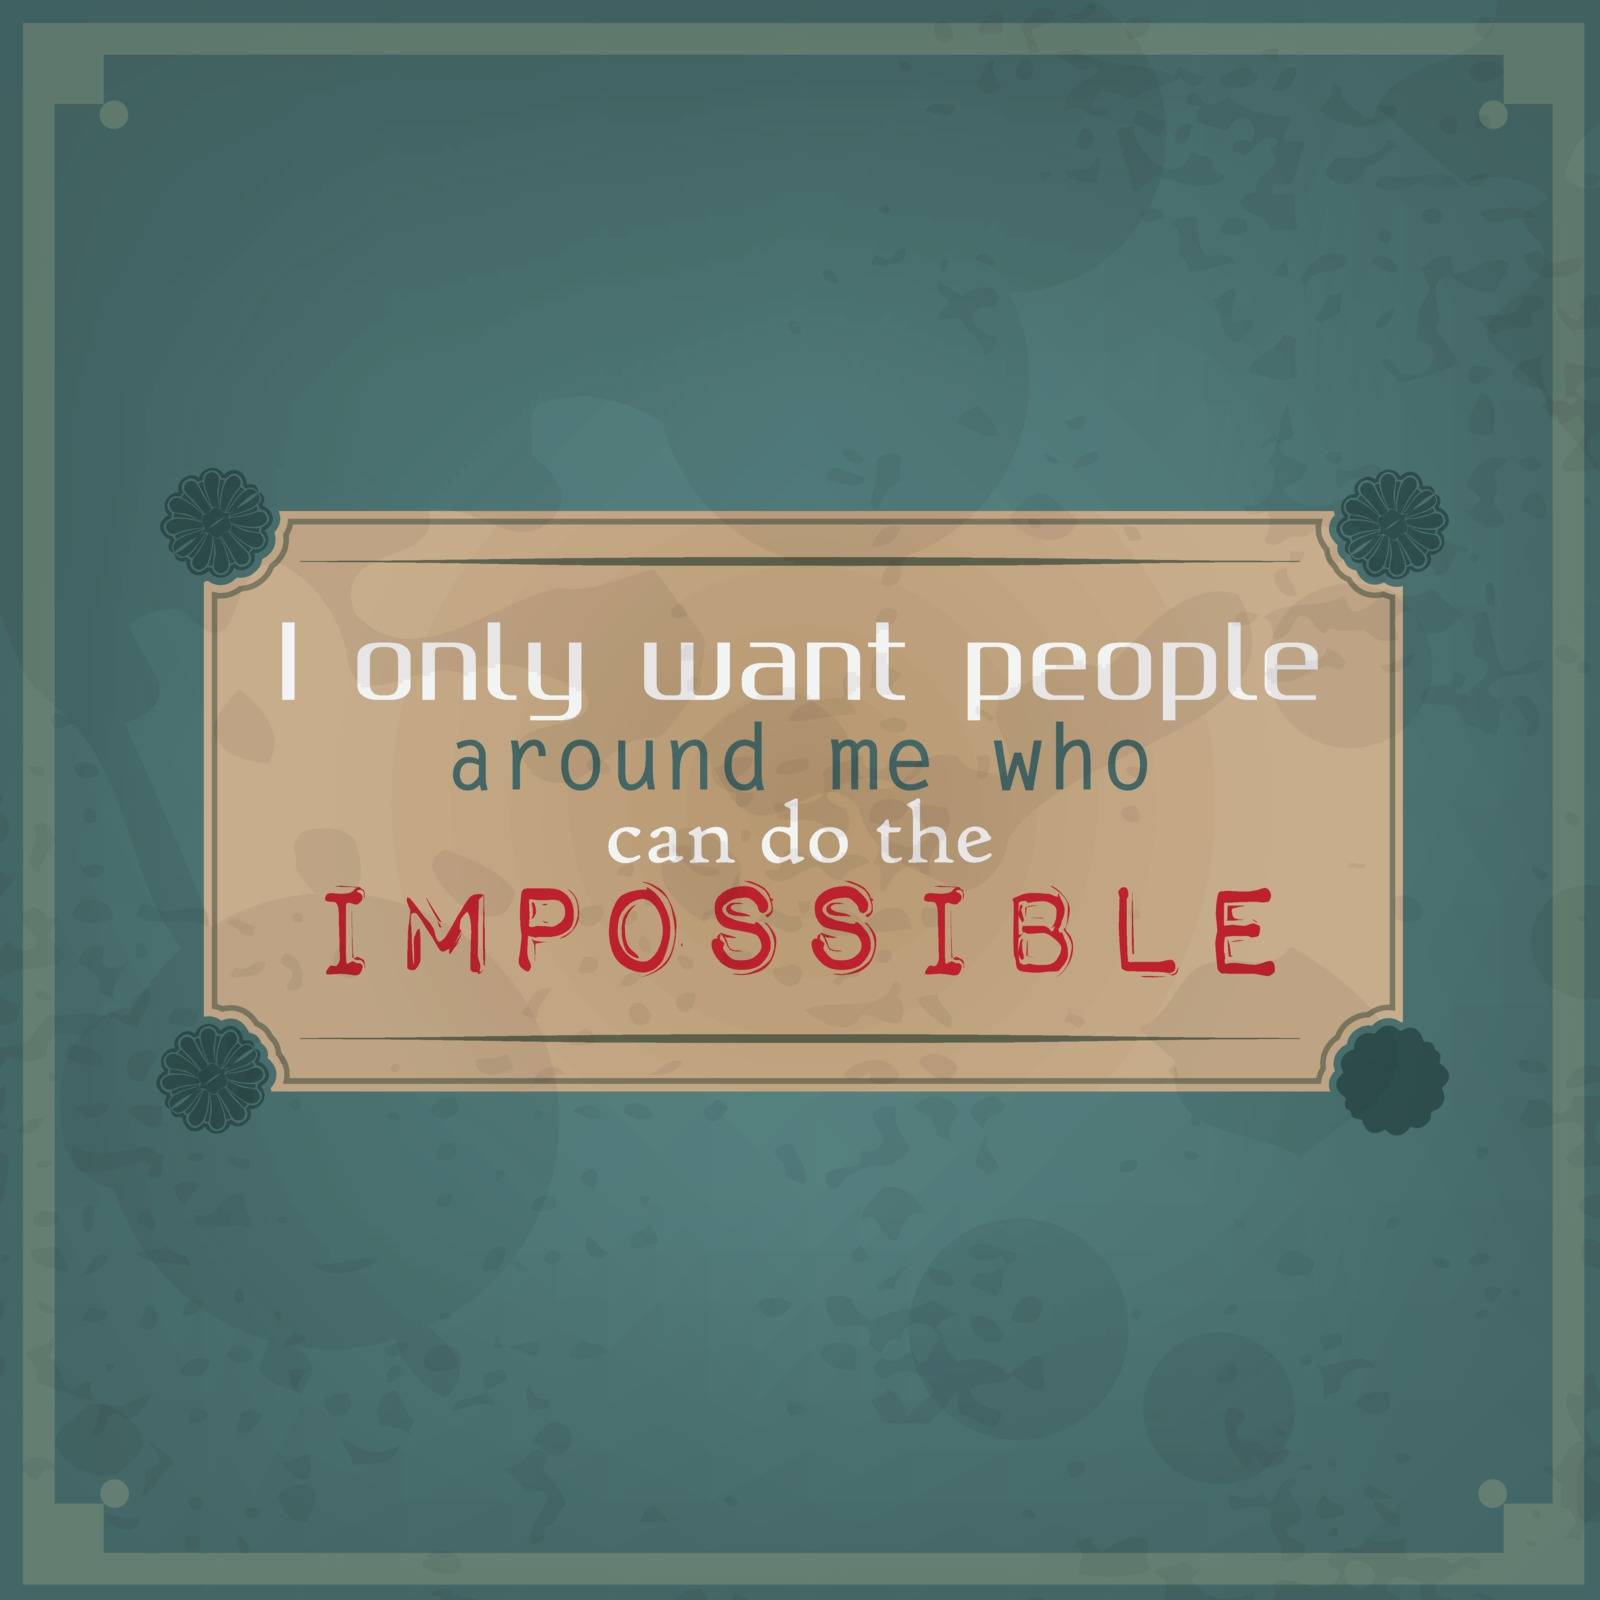 I only want people around me who can do the impossible by maxmitzu